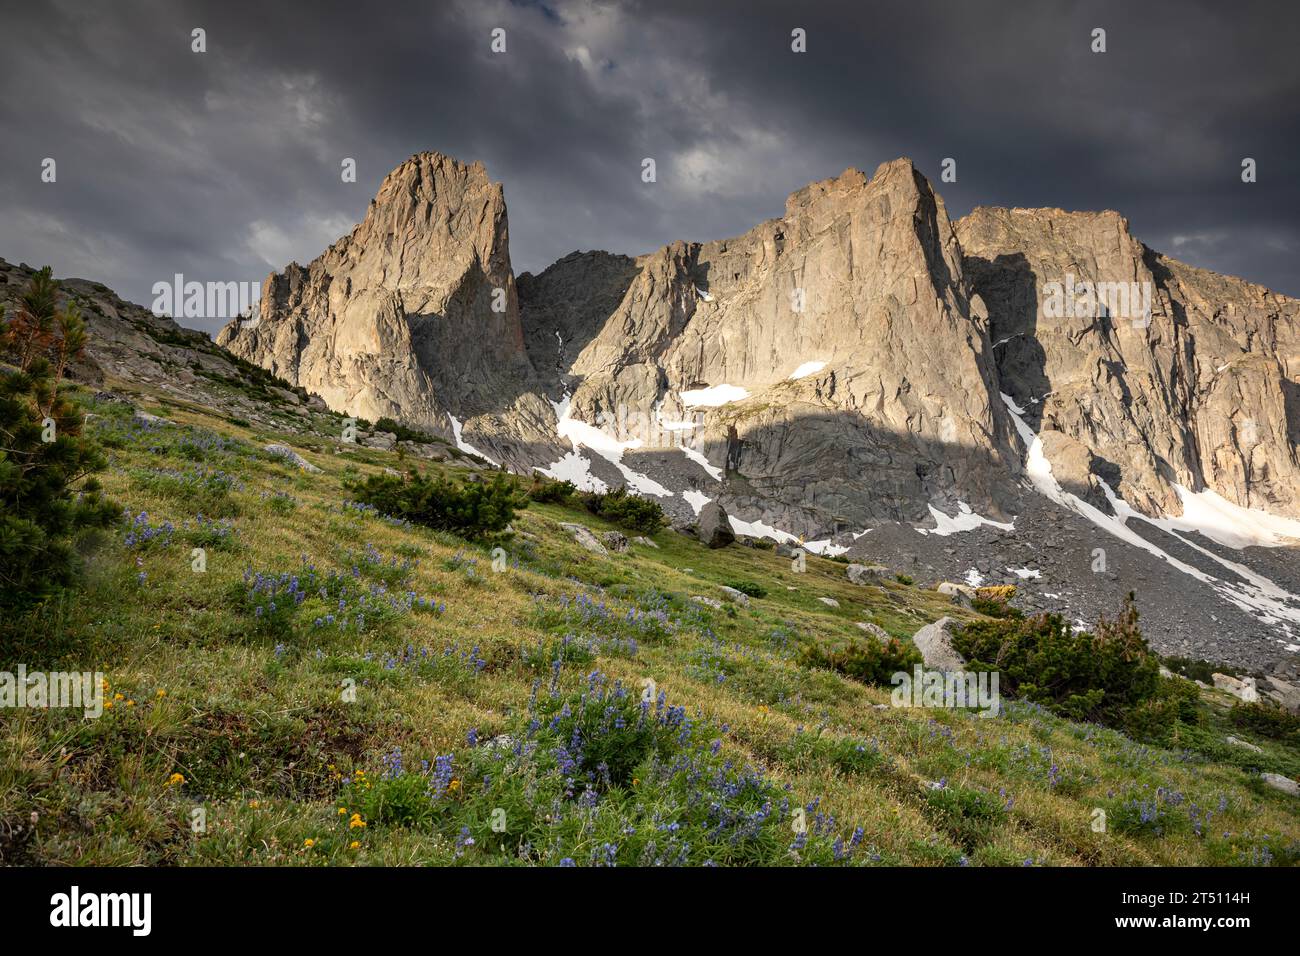 WY05590-00...WYOMING - Early morning light in Warbonnet, Warrior and Warrior 2 Peaks, part of the Cirque of the Towers. Stock Photo